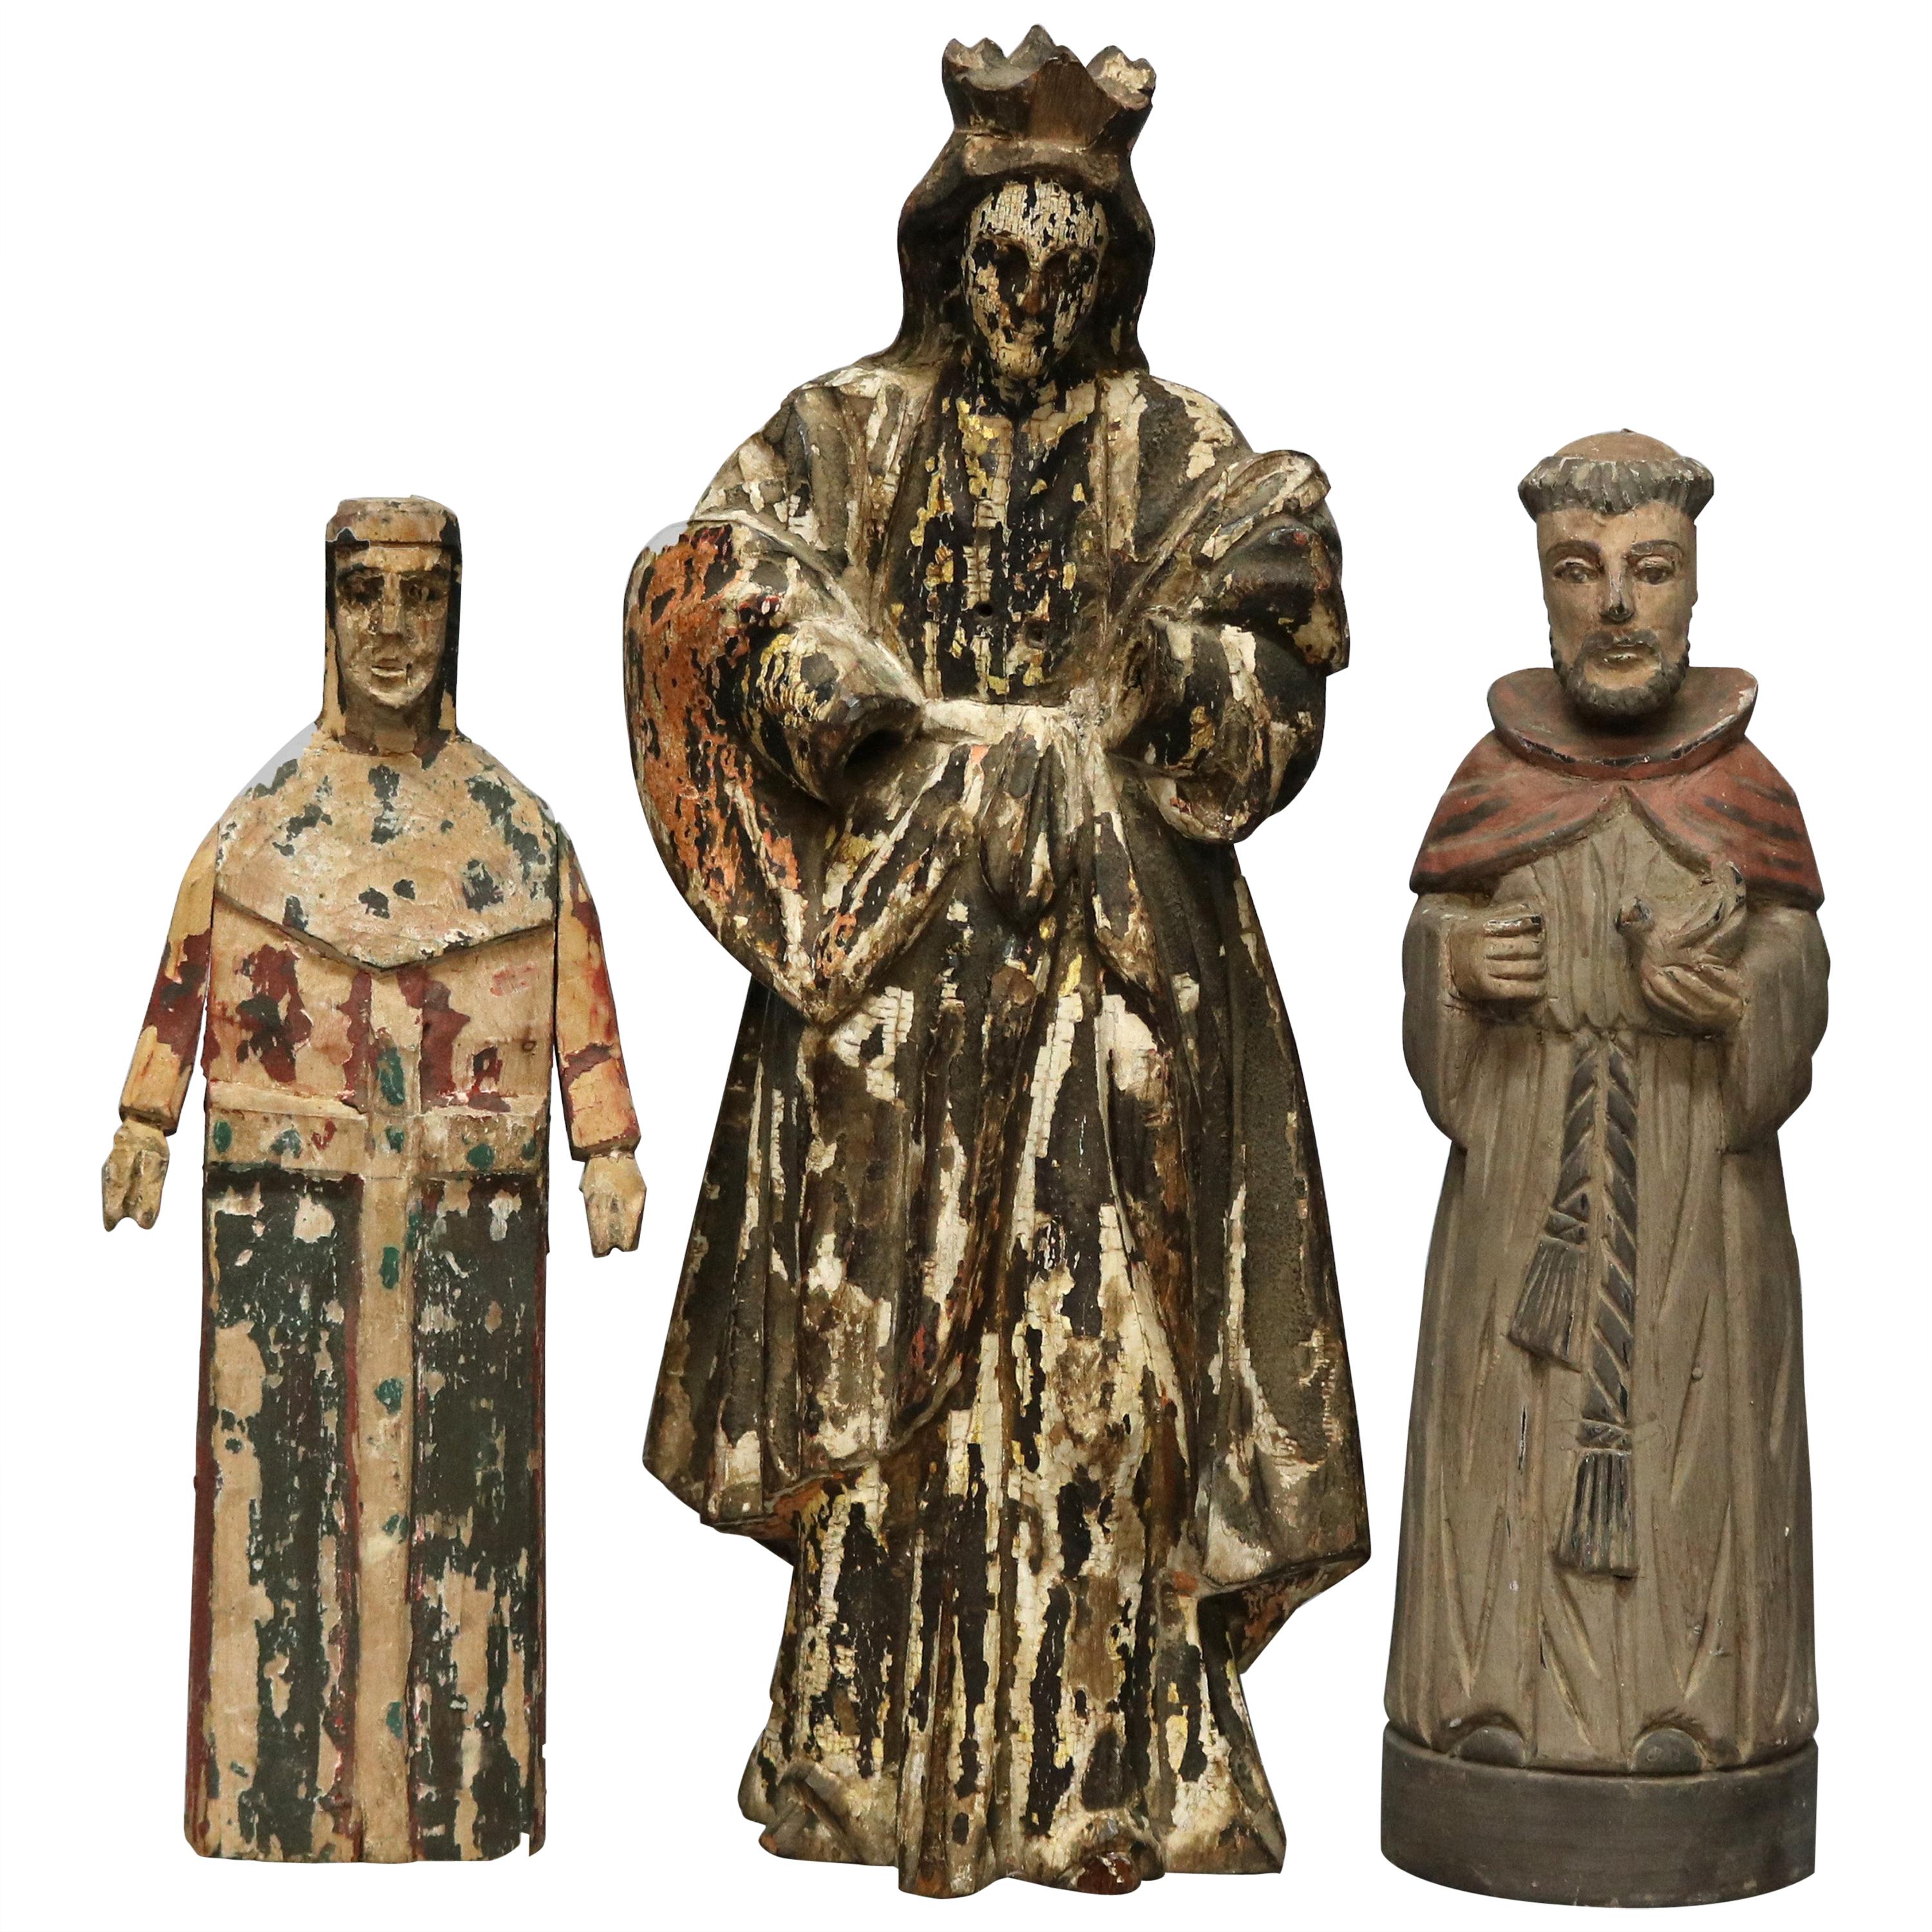 Antique Group of Three Spanish Polychromed Carved Wood Santos Figures